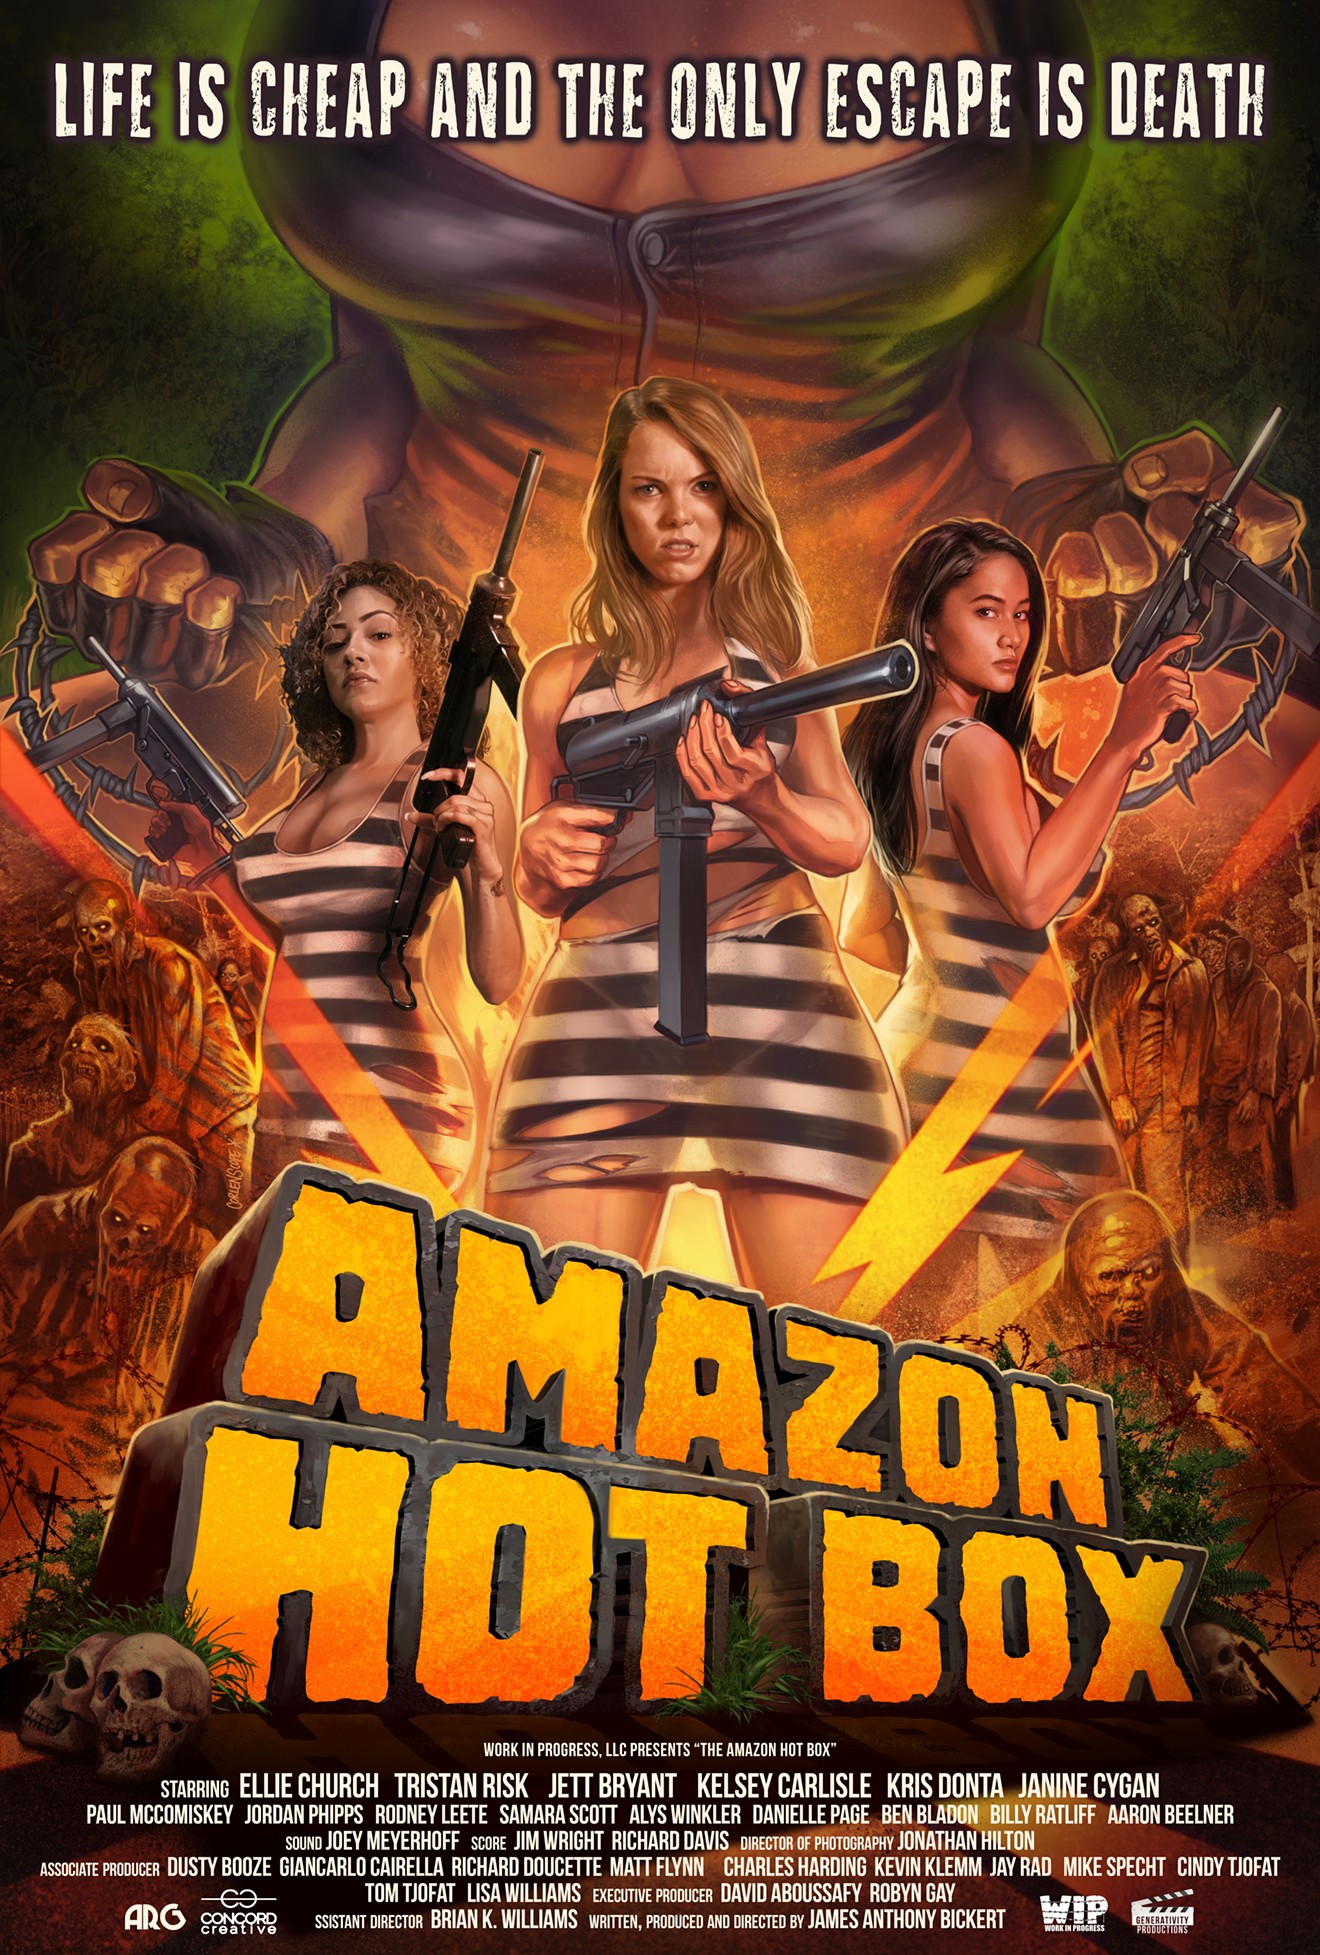 The women's prison flick Amazon Hot Box , which will be screened at this weekend's Texas Frightmare Weekend, features torture devices, man-eating crocodiles, religious zealots and the voodoo undead.